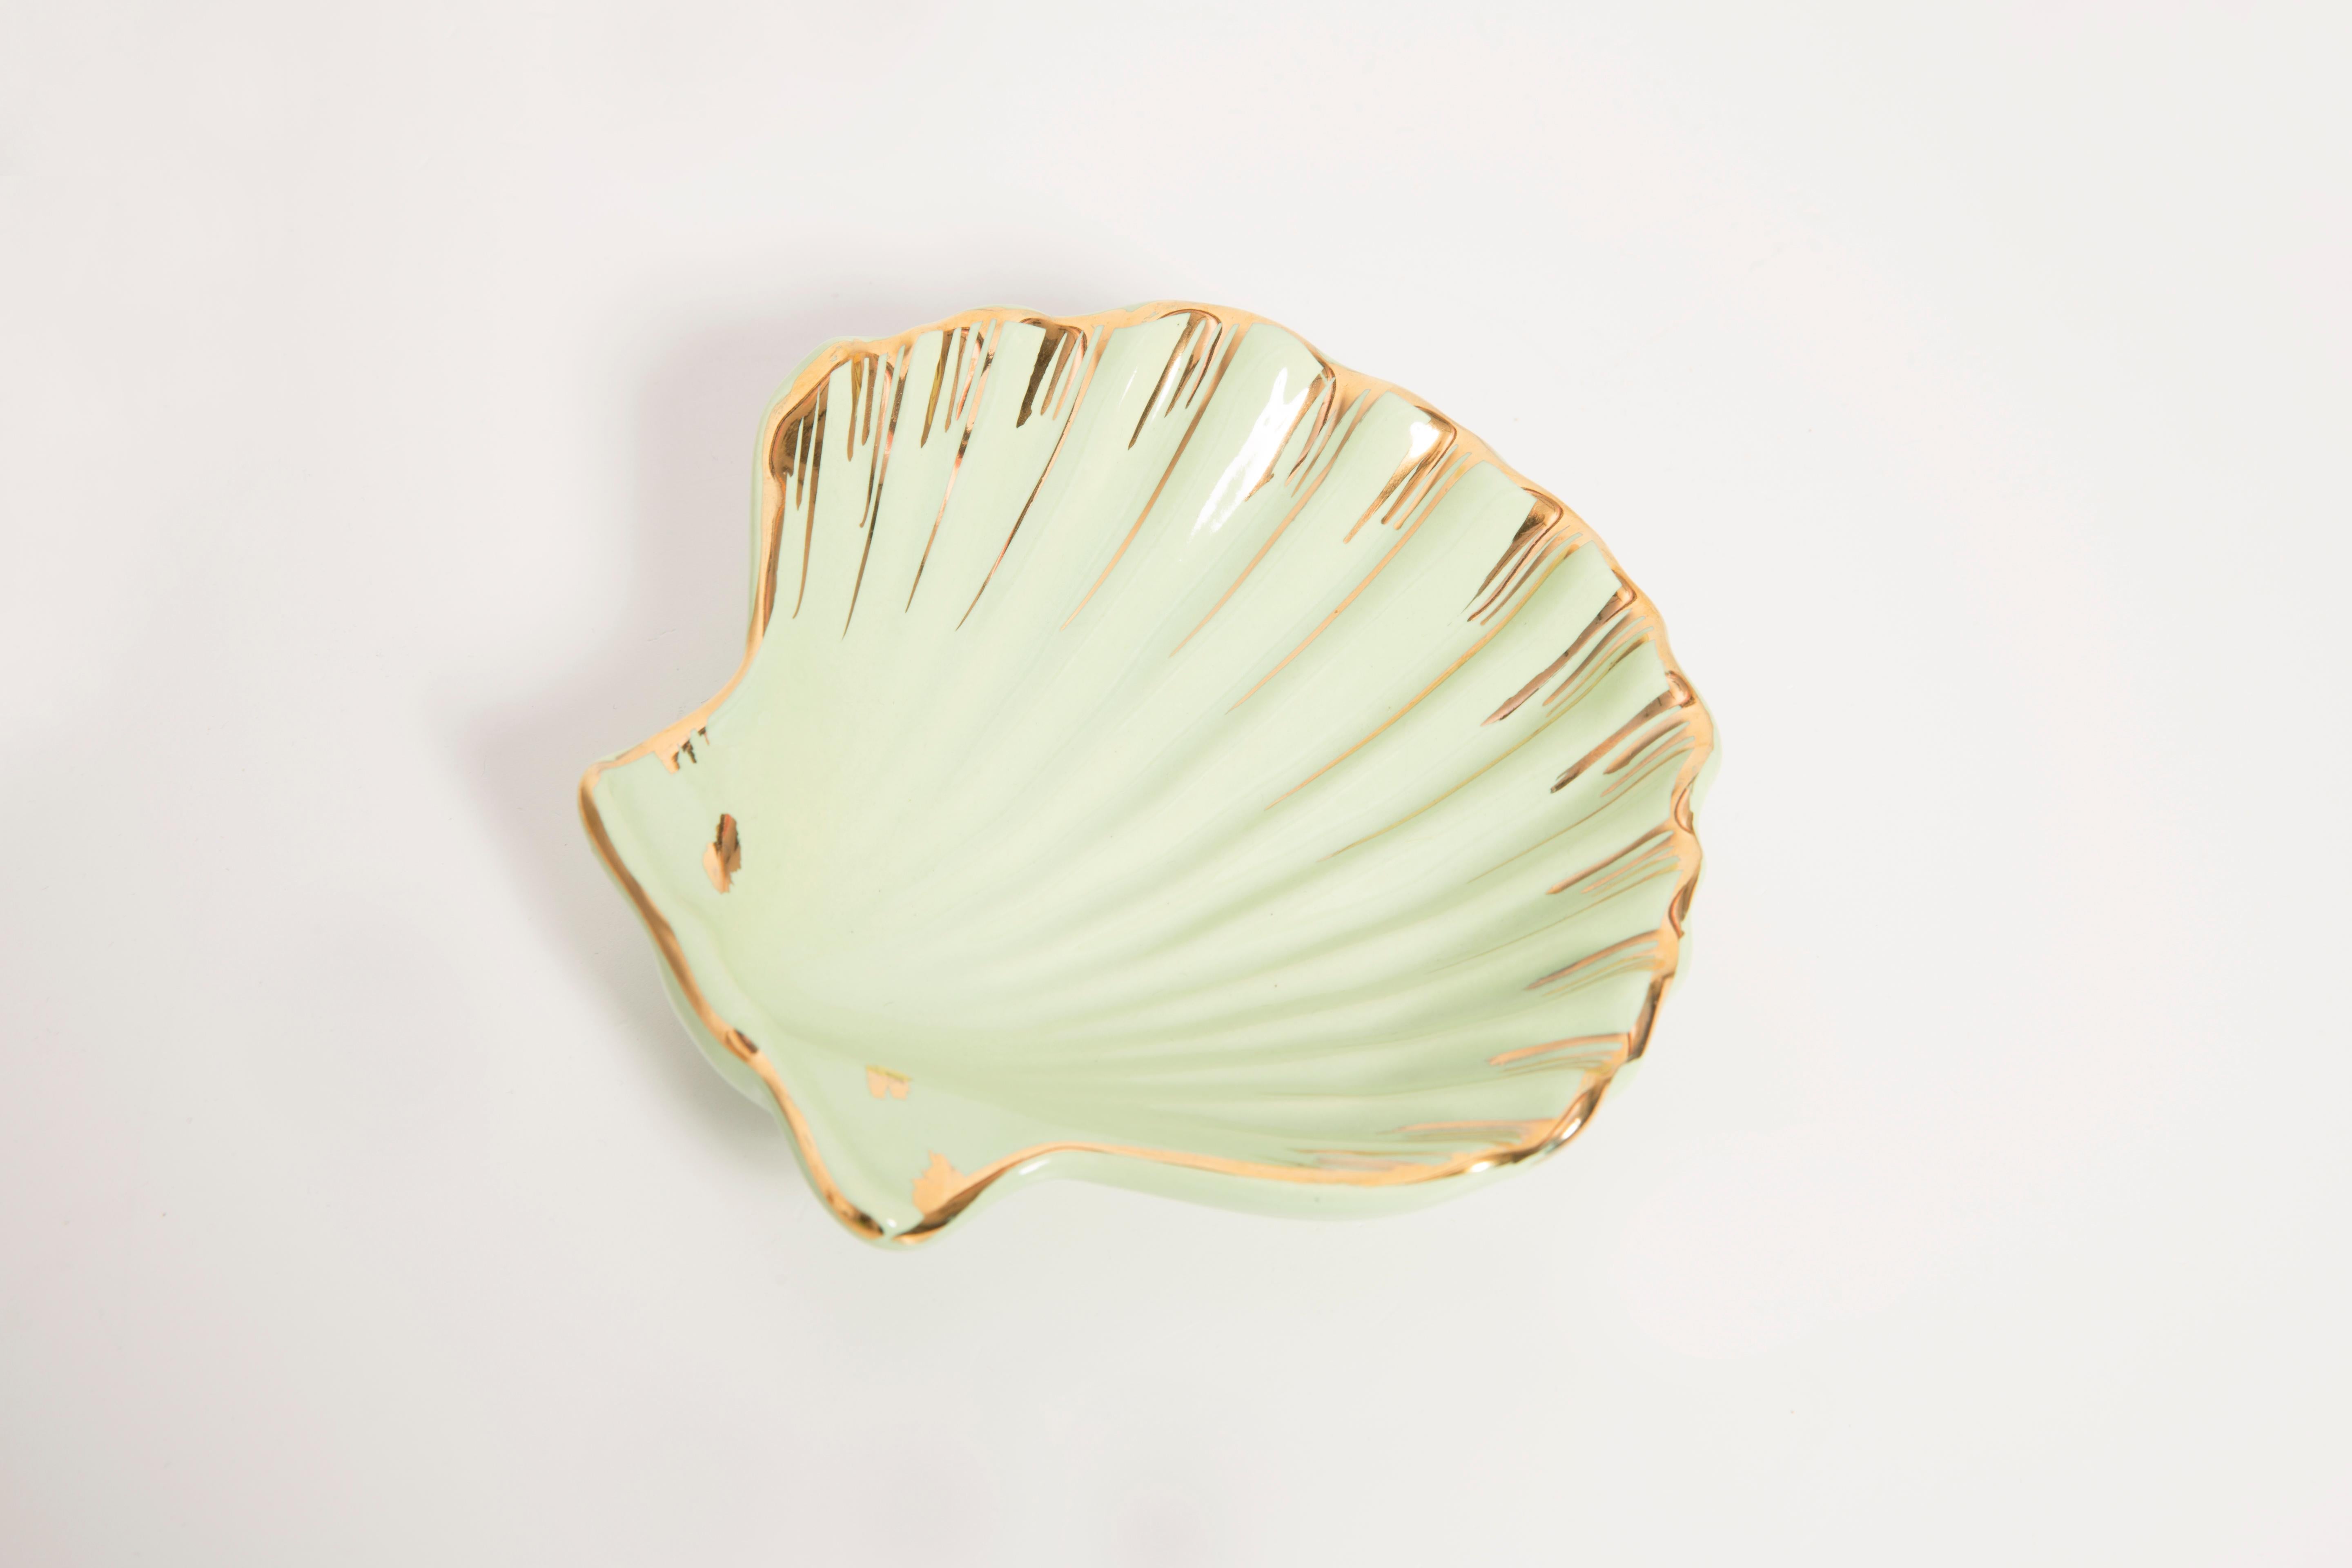 Vintage Wood and Ceramic Green Shells Decorative Plate, France, 1960s For Sale 2